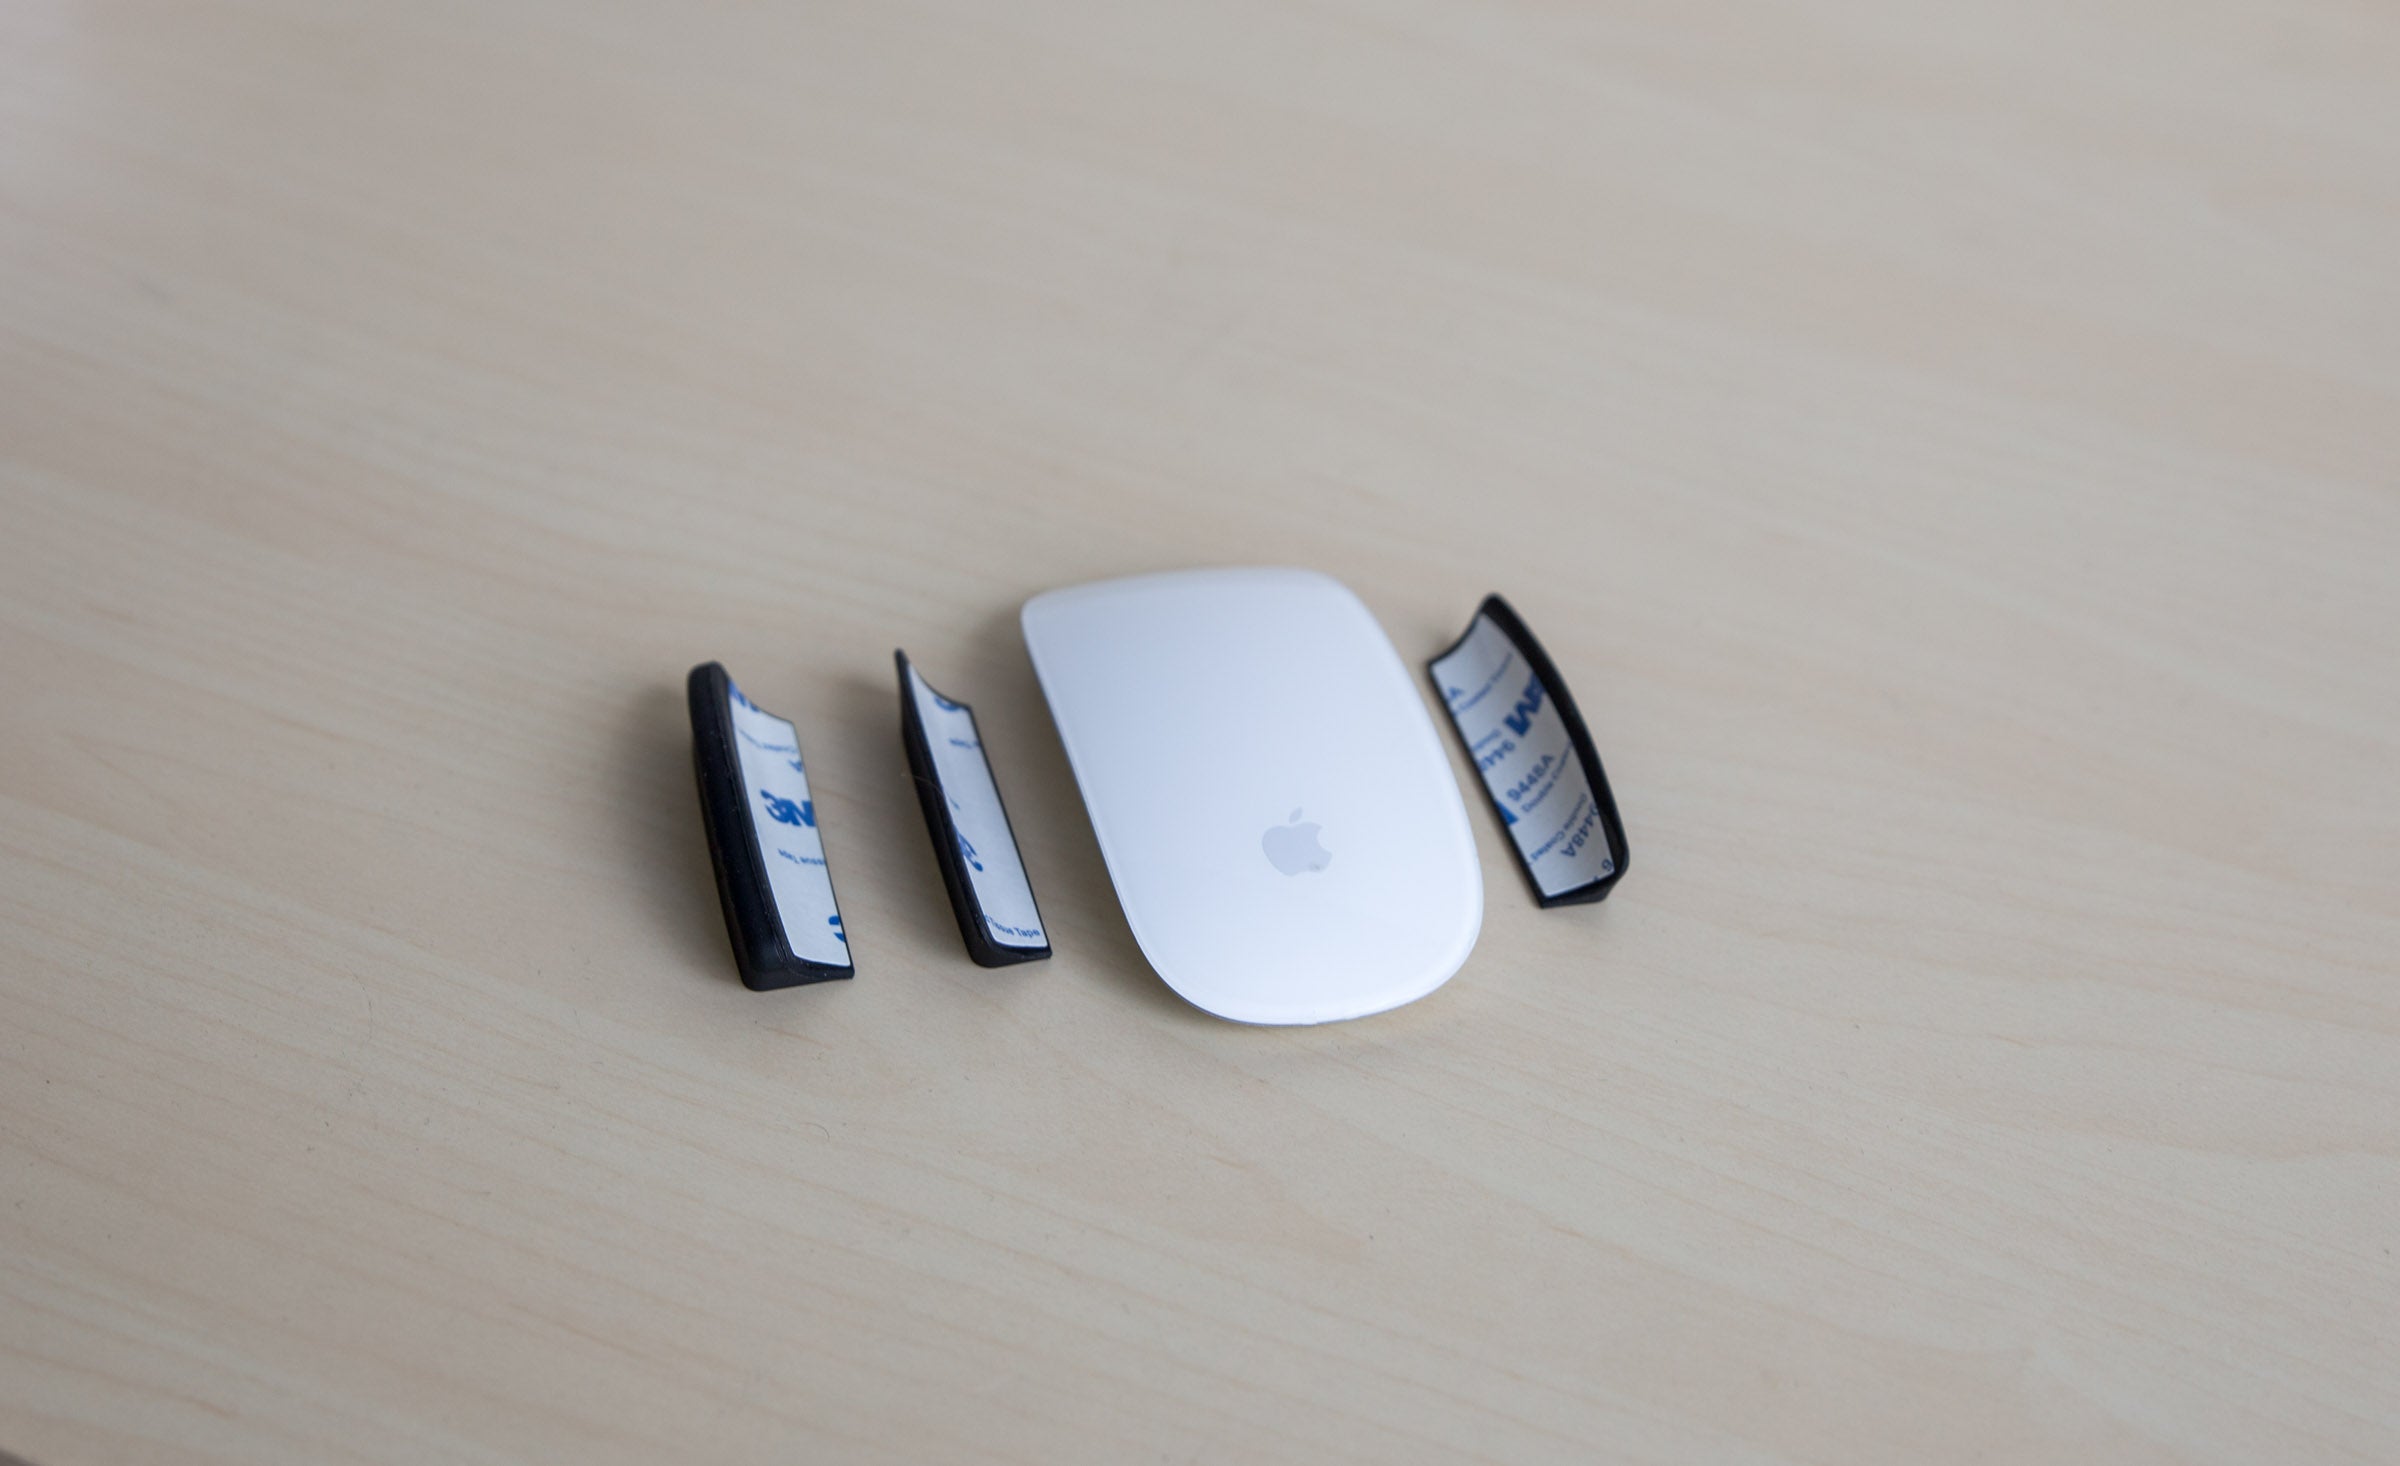 Is Apple's Magic Mouse 2: Worth the money?